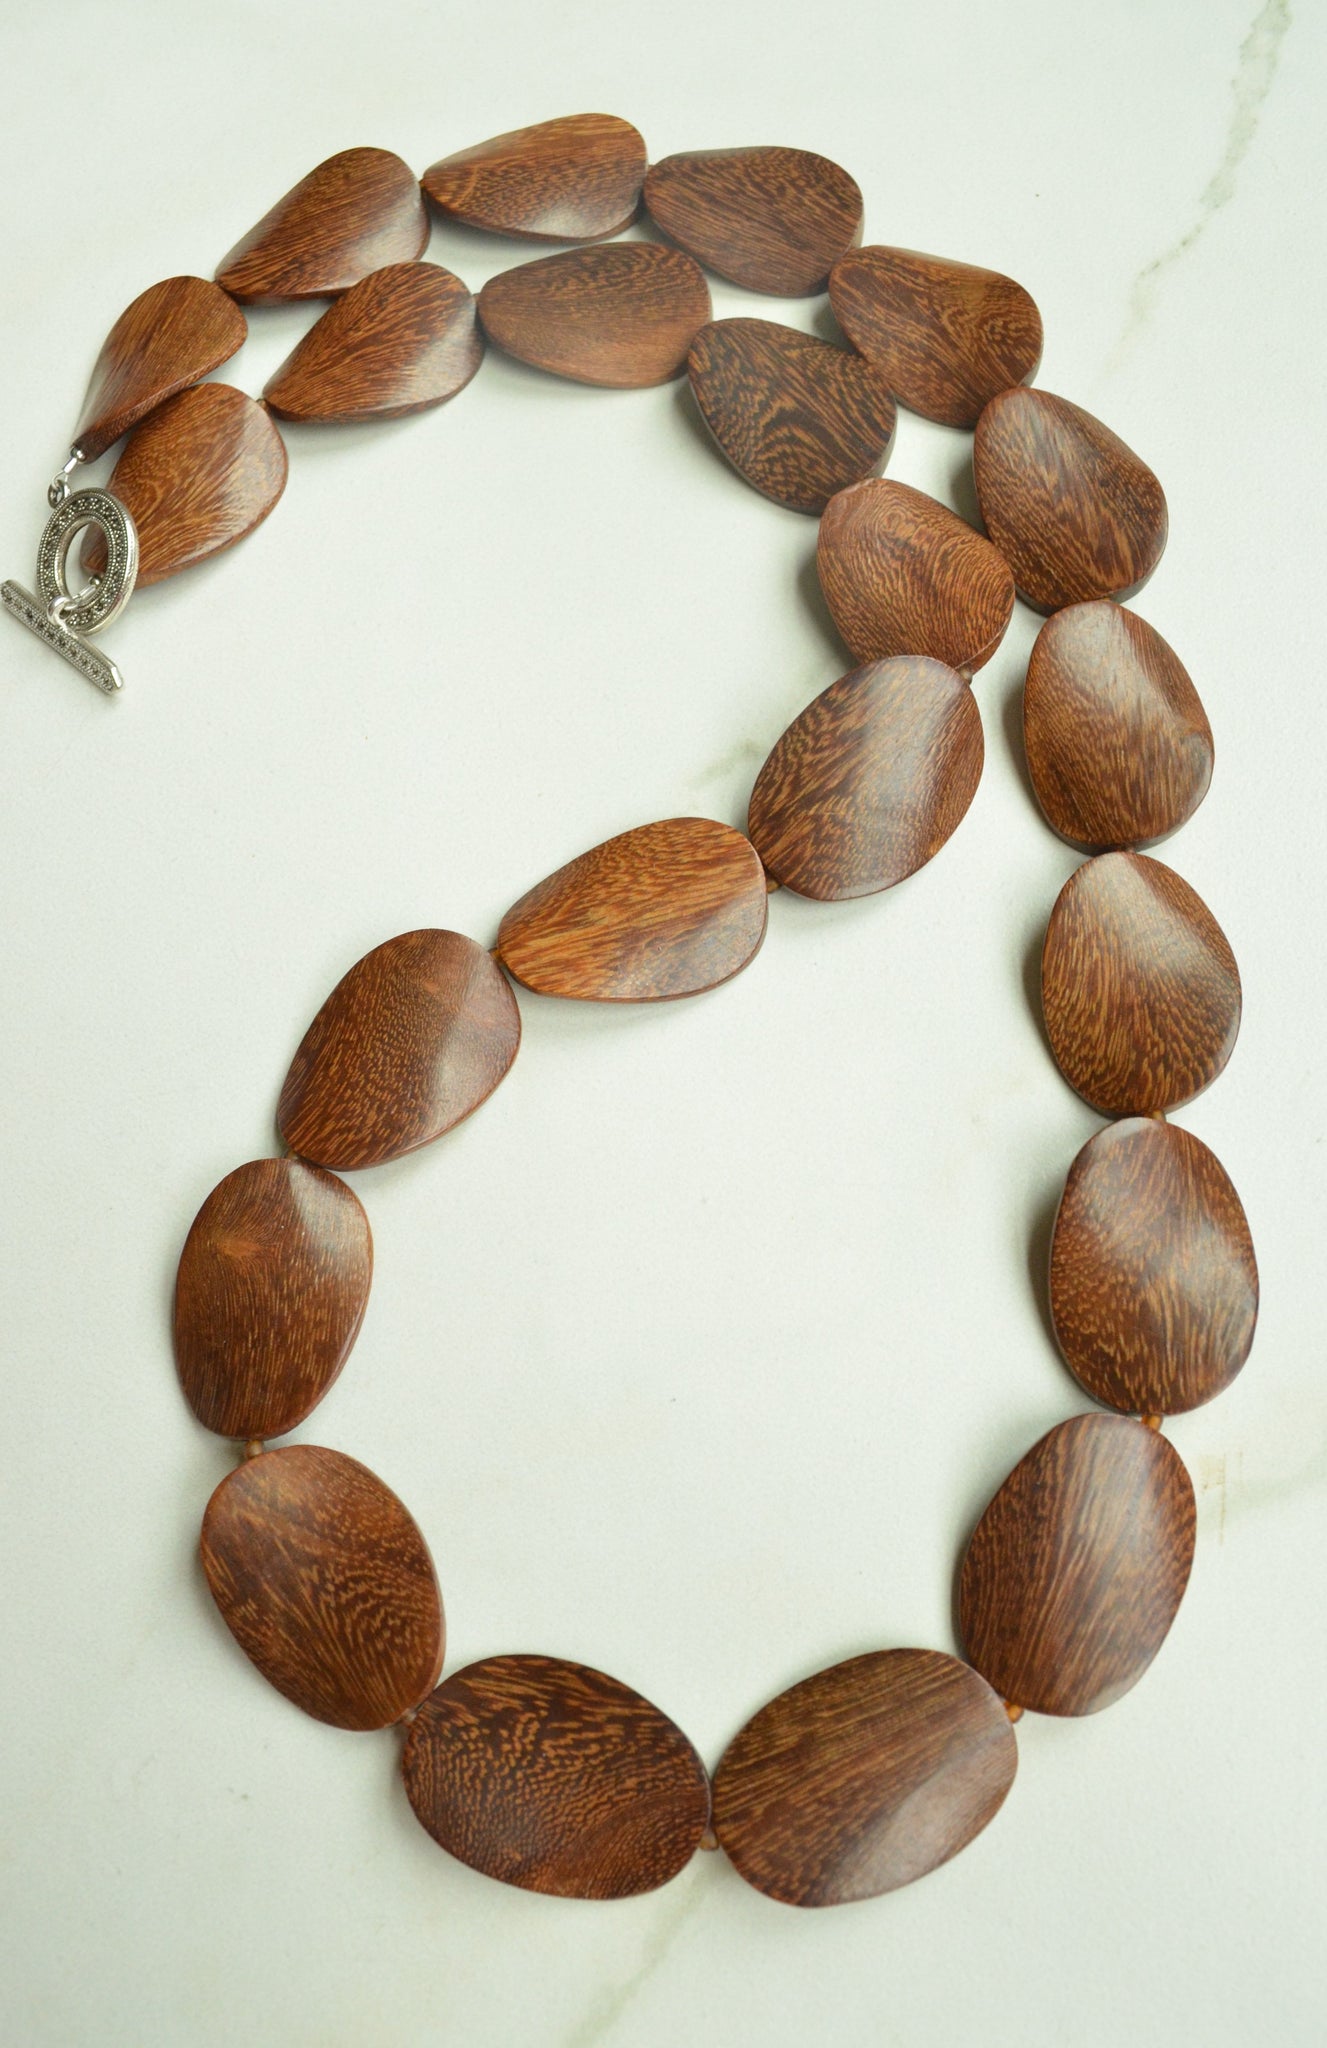 Beaded Reclaimed Wood Statement Necklace from Namibia – JJ Caprices